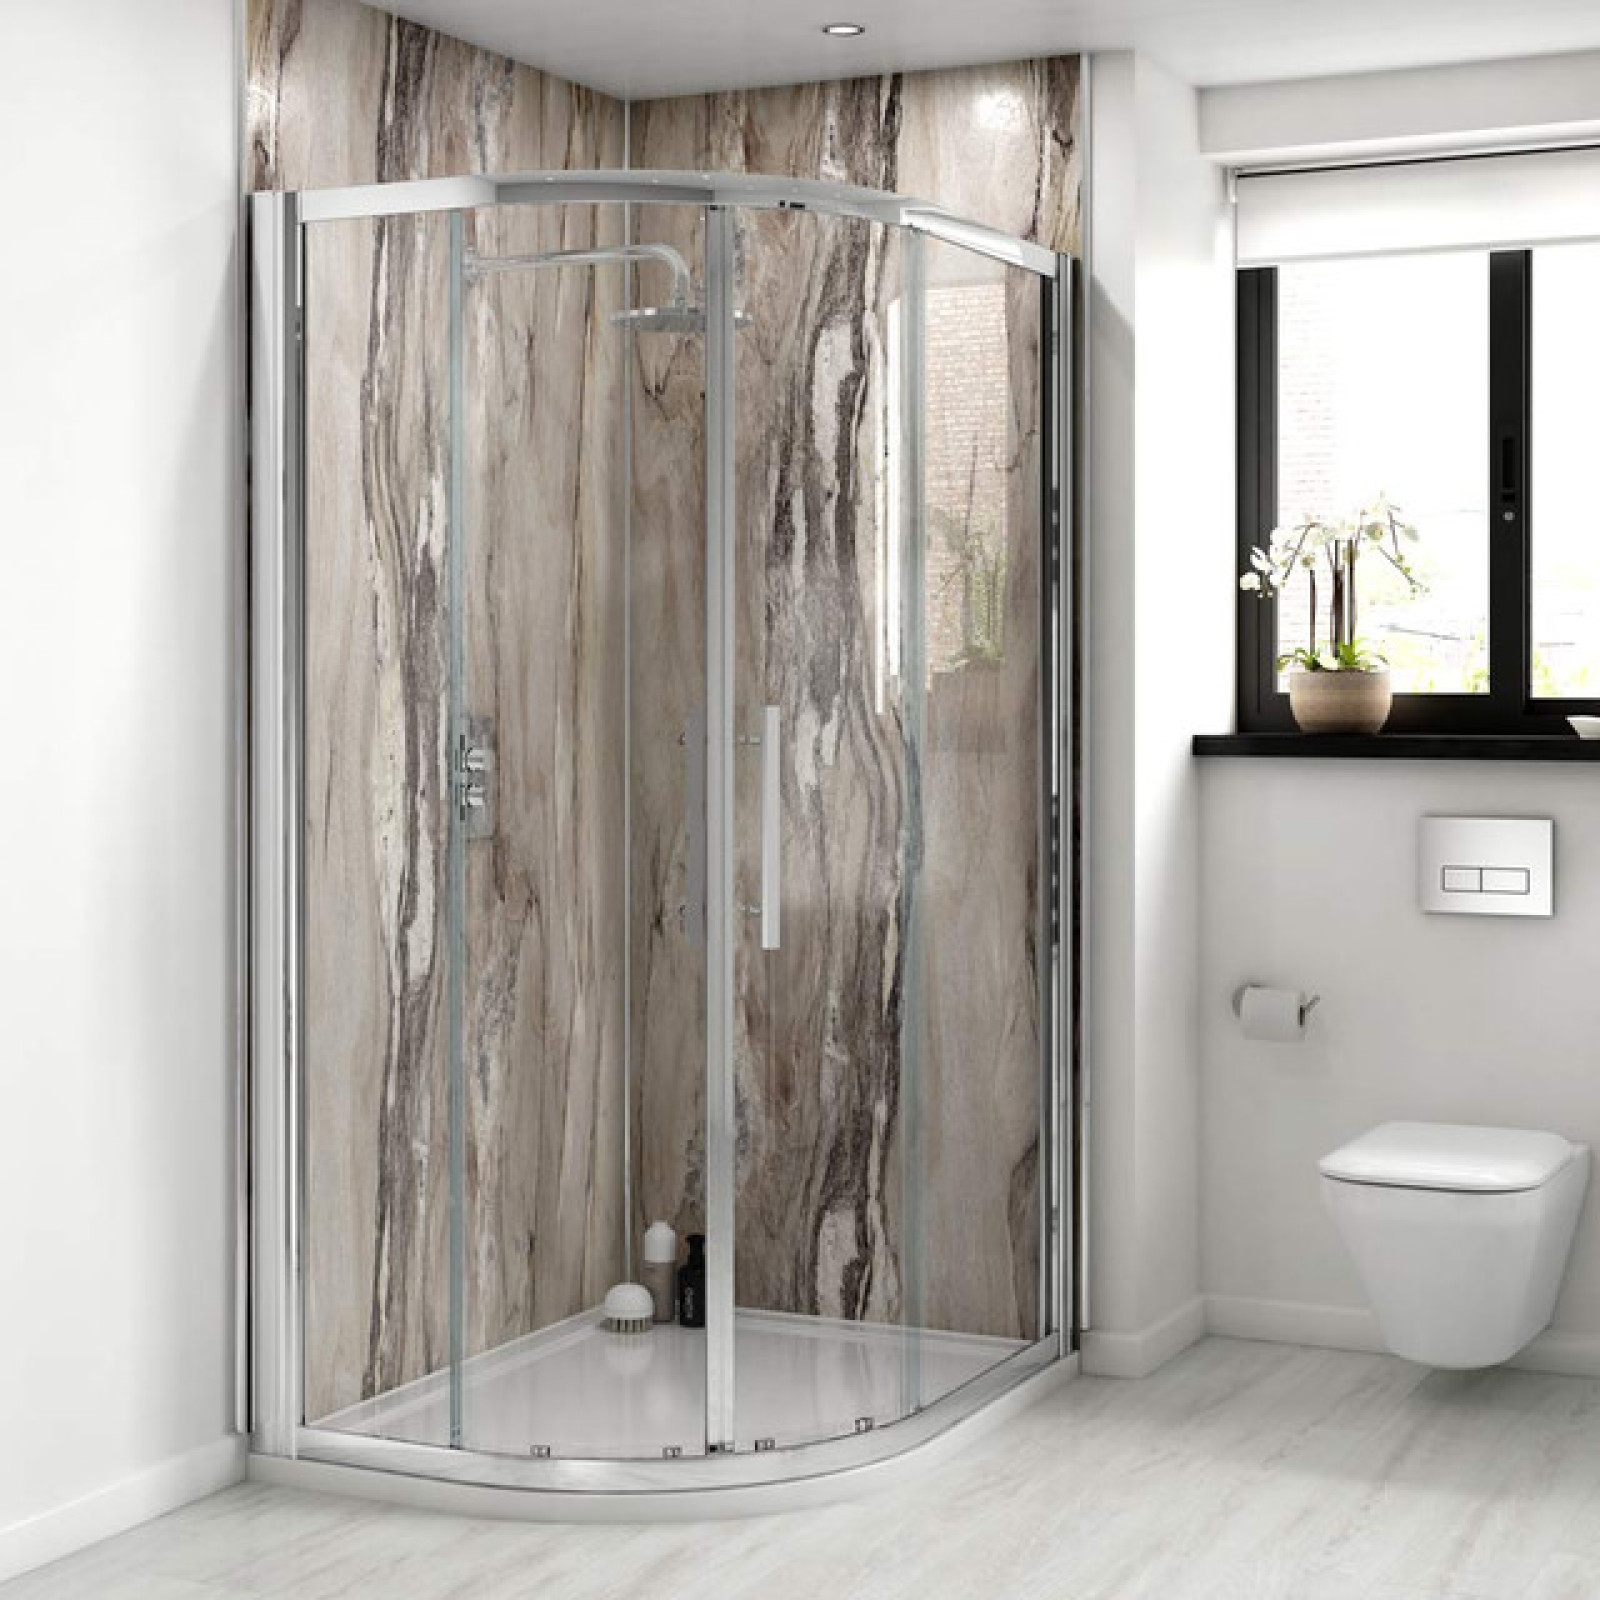 Nuova 'Dolce Vita' Marble Effect Wet Wall Panels. - The Bathroom